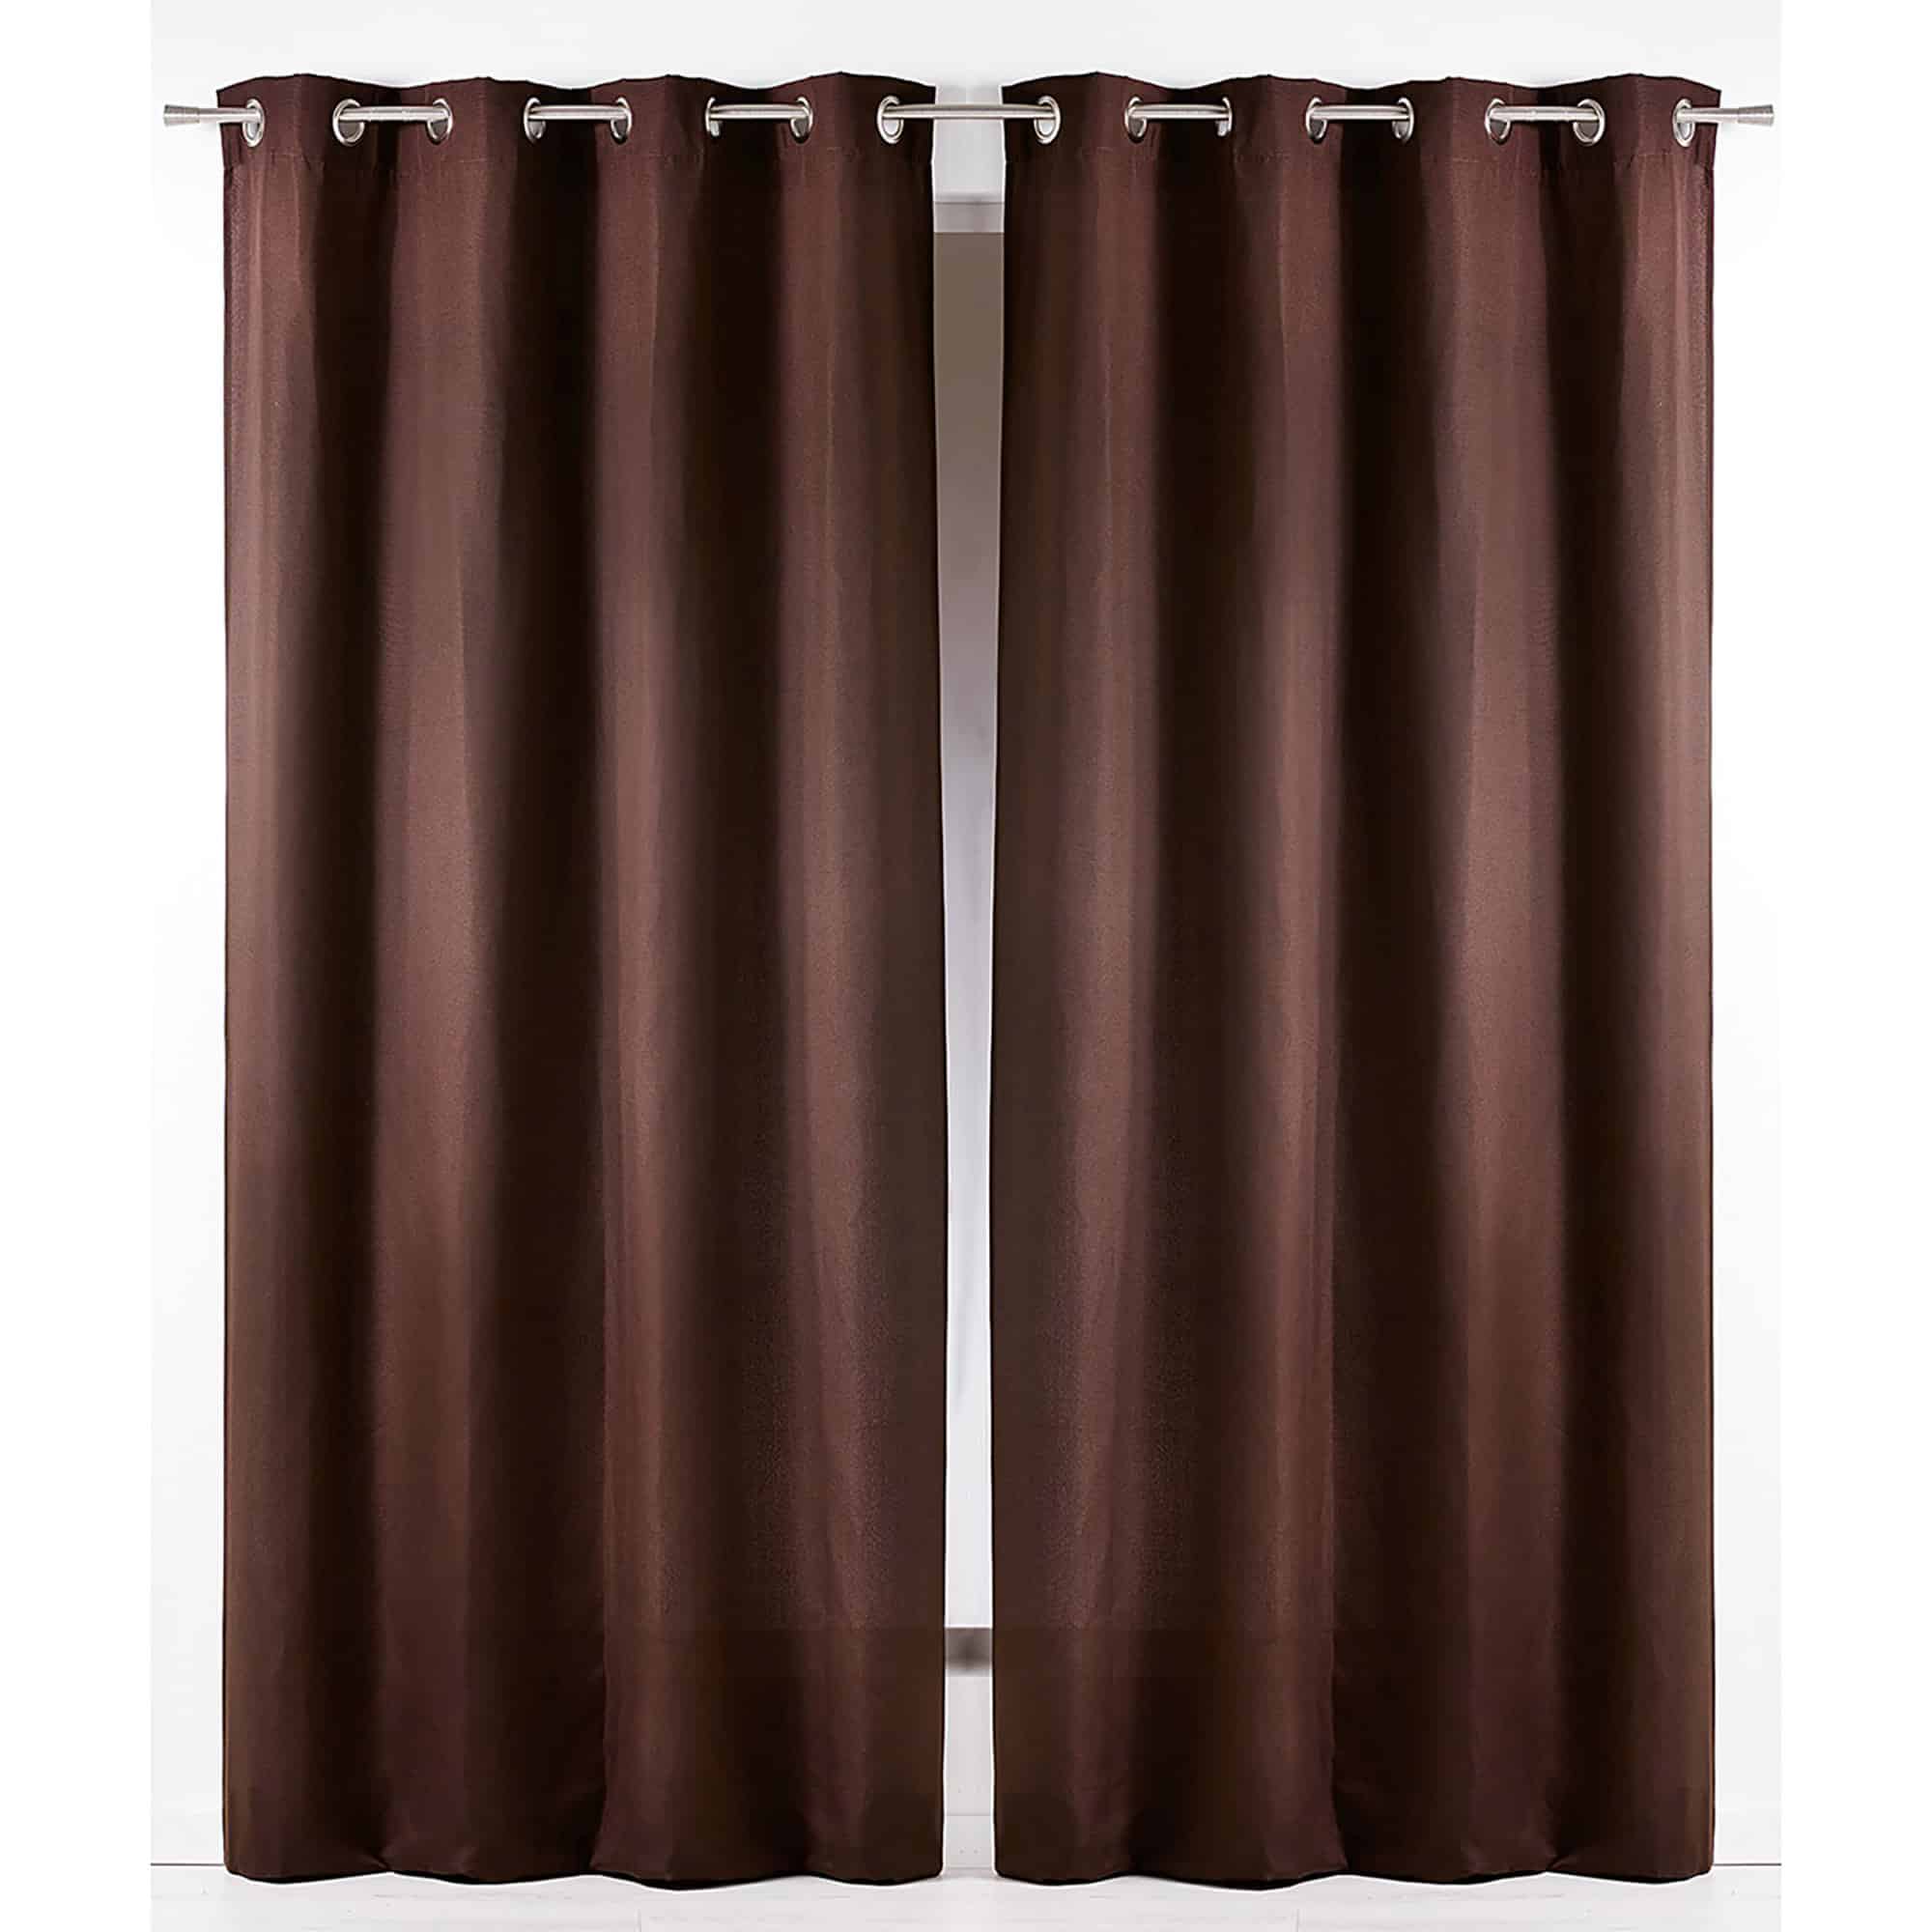 set of 2 solid chocolate brown 100% cotton window curtains for large window